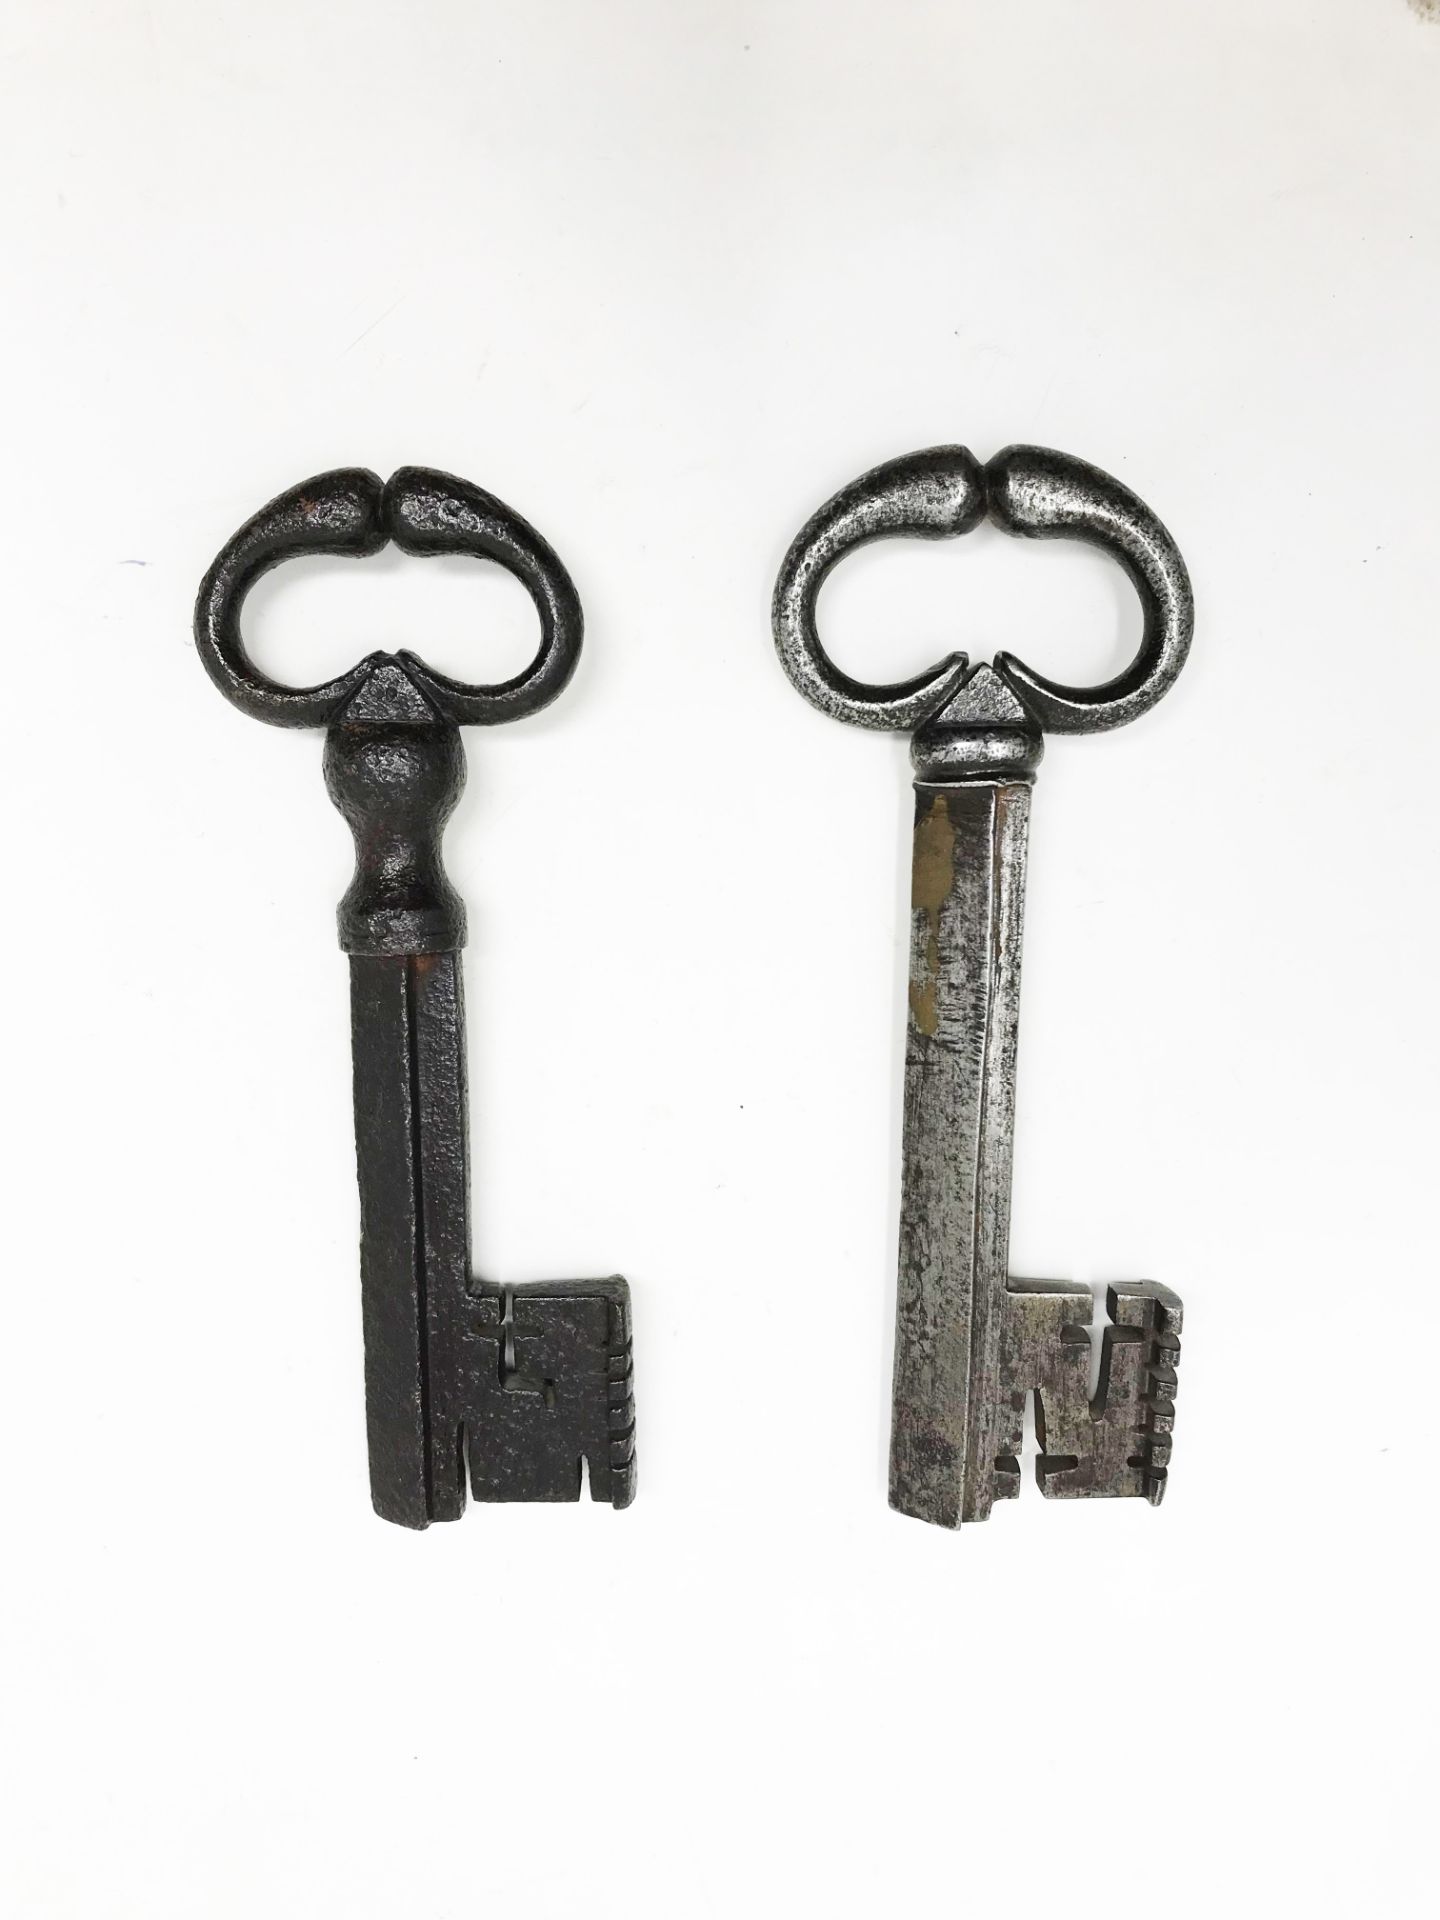 Two keys with frog's legs rings13, 82 - 14, 28 cmPart of the chapter "From Enlightenment to